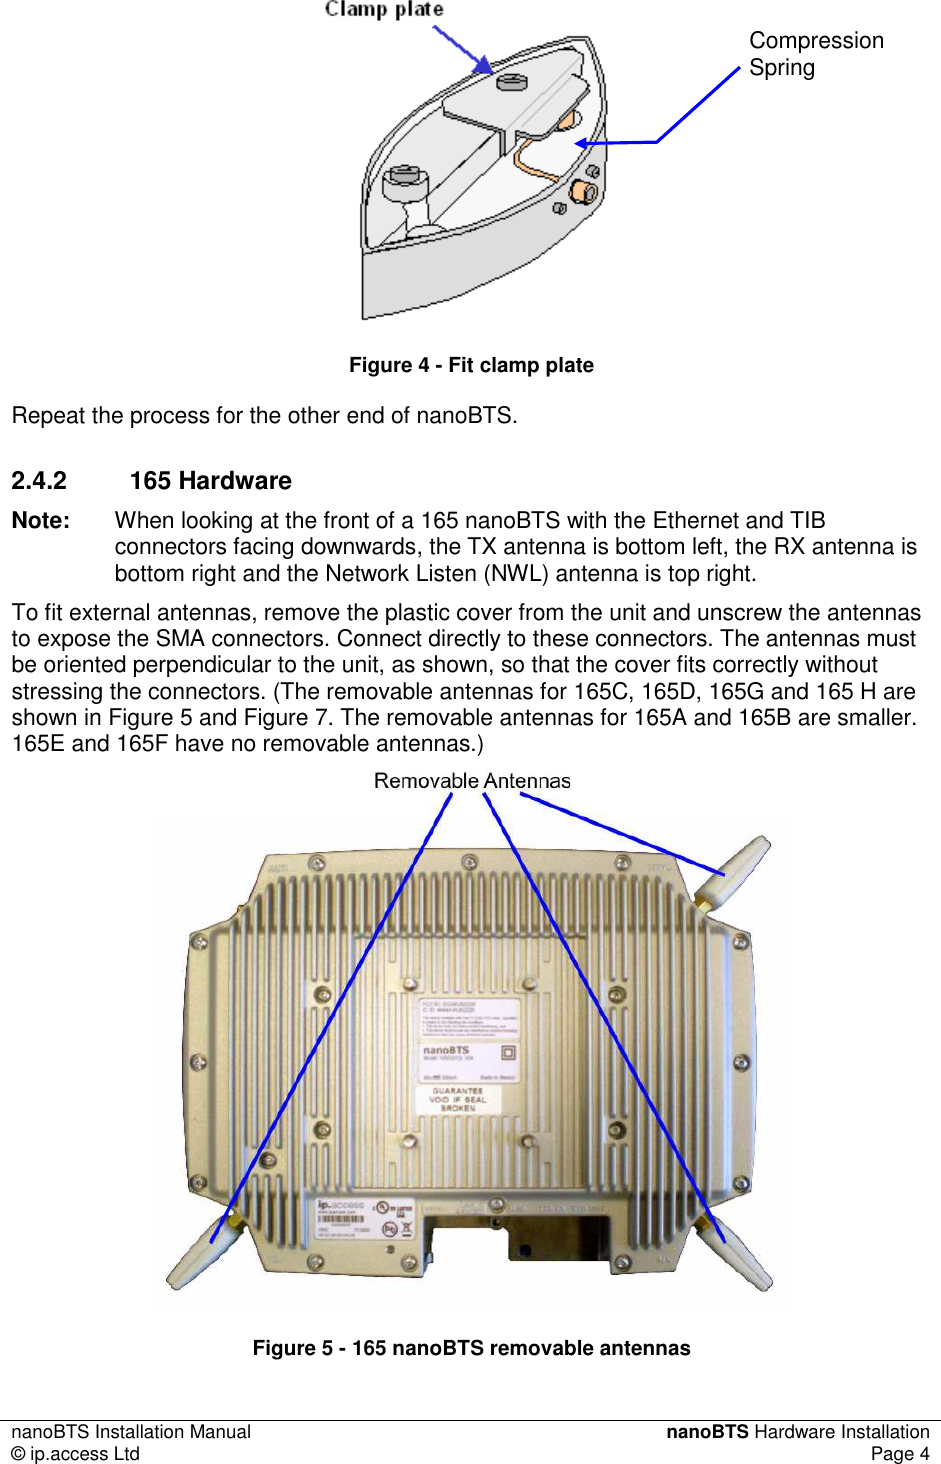 nanoBTS Installation Manual  nanoBTS Hardware Installation © ip.access Ltd  Page 4     Figure 4 - Fit clamp plate Repeat the process for the other end of nanoBTS. 2.4.2  165 Hardware Note:  When looking at the front of a 165 nanoBTS with the Ethernet and TIB connectors facing downwards, the TX antenna is bottom left, the RX antenna is bottom right and the Network Listen (NWL) antenna is top right. To fit external antennas, remove the plastic cover from the unit and unscrew the antennas to expose the SMA connectors. Connect directly to these connectors. The antennas must be oriented perpendicular to the unit, as shown, so that the cover fits correctly without stressing the connectors. (The removable antennas for 165C, 165D, 165G and 165 H are shown in Figure 5 and Figure 7. The removable antennas for 165A and 165B are smaller. 165E and 165F have no removable antennas.)   Figure 5 - 165 nanoBTS removable antennas Compression Spring 